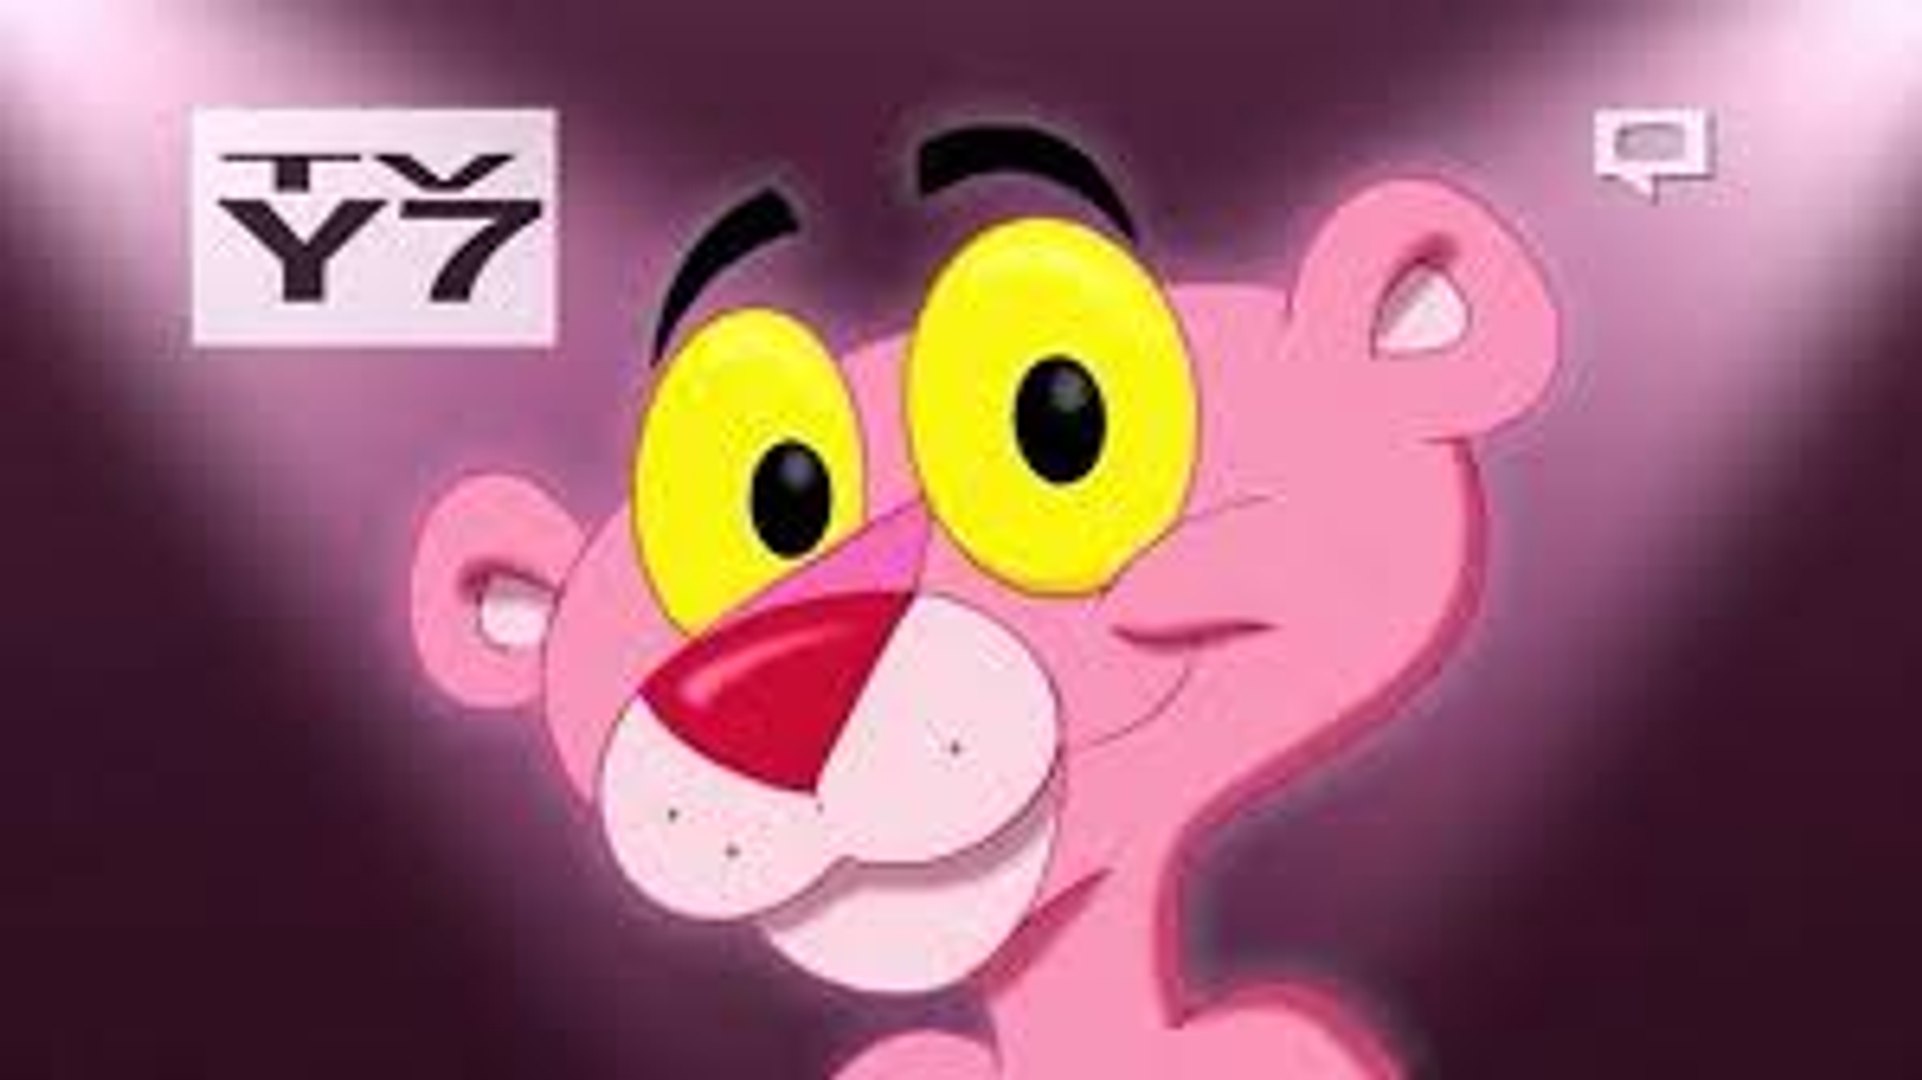 Pink Panther Goes to the Doctor, 35-Minute Compilation